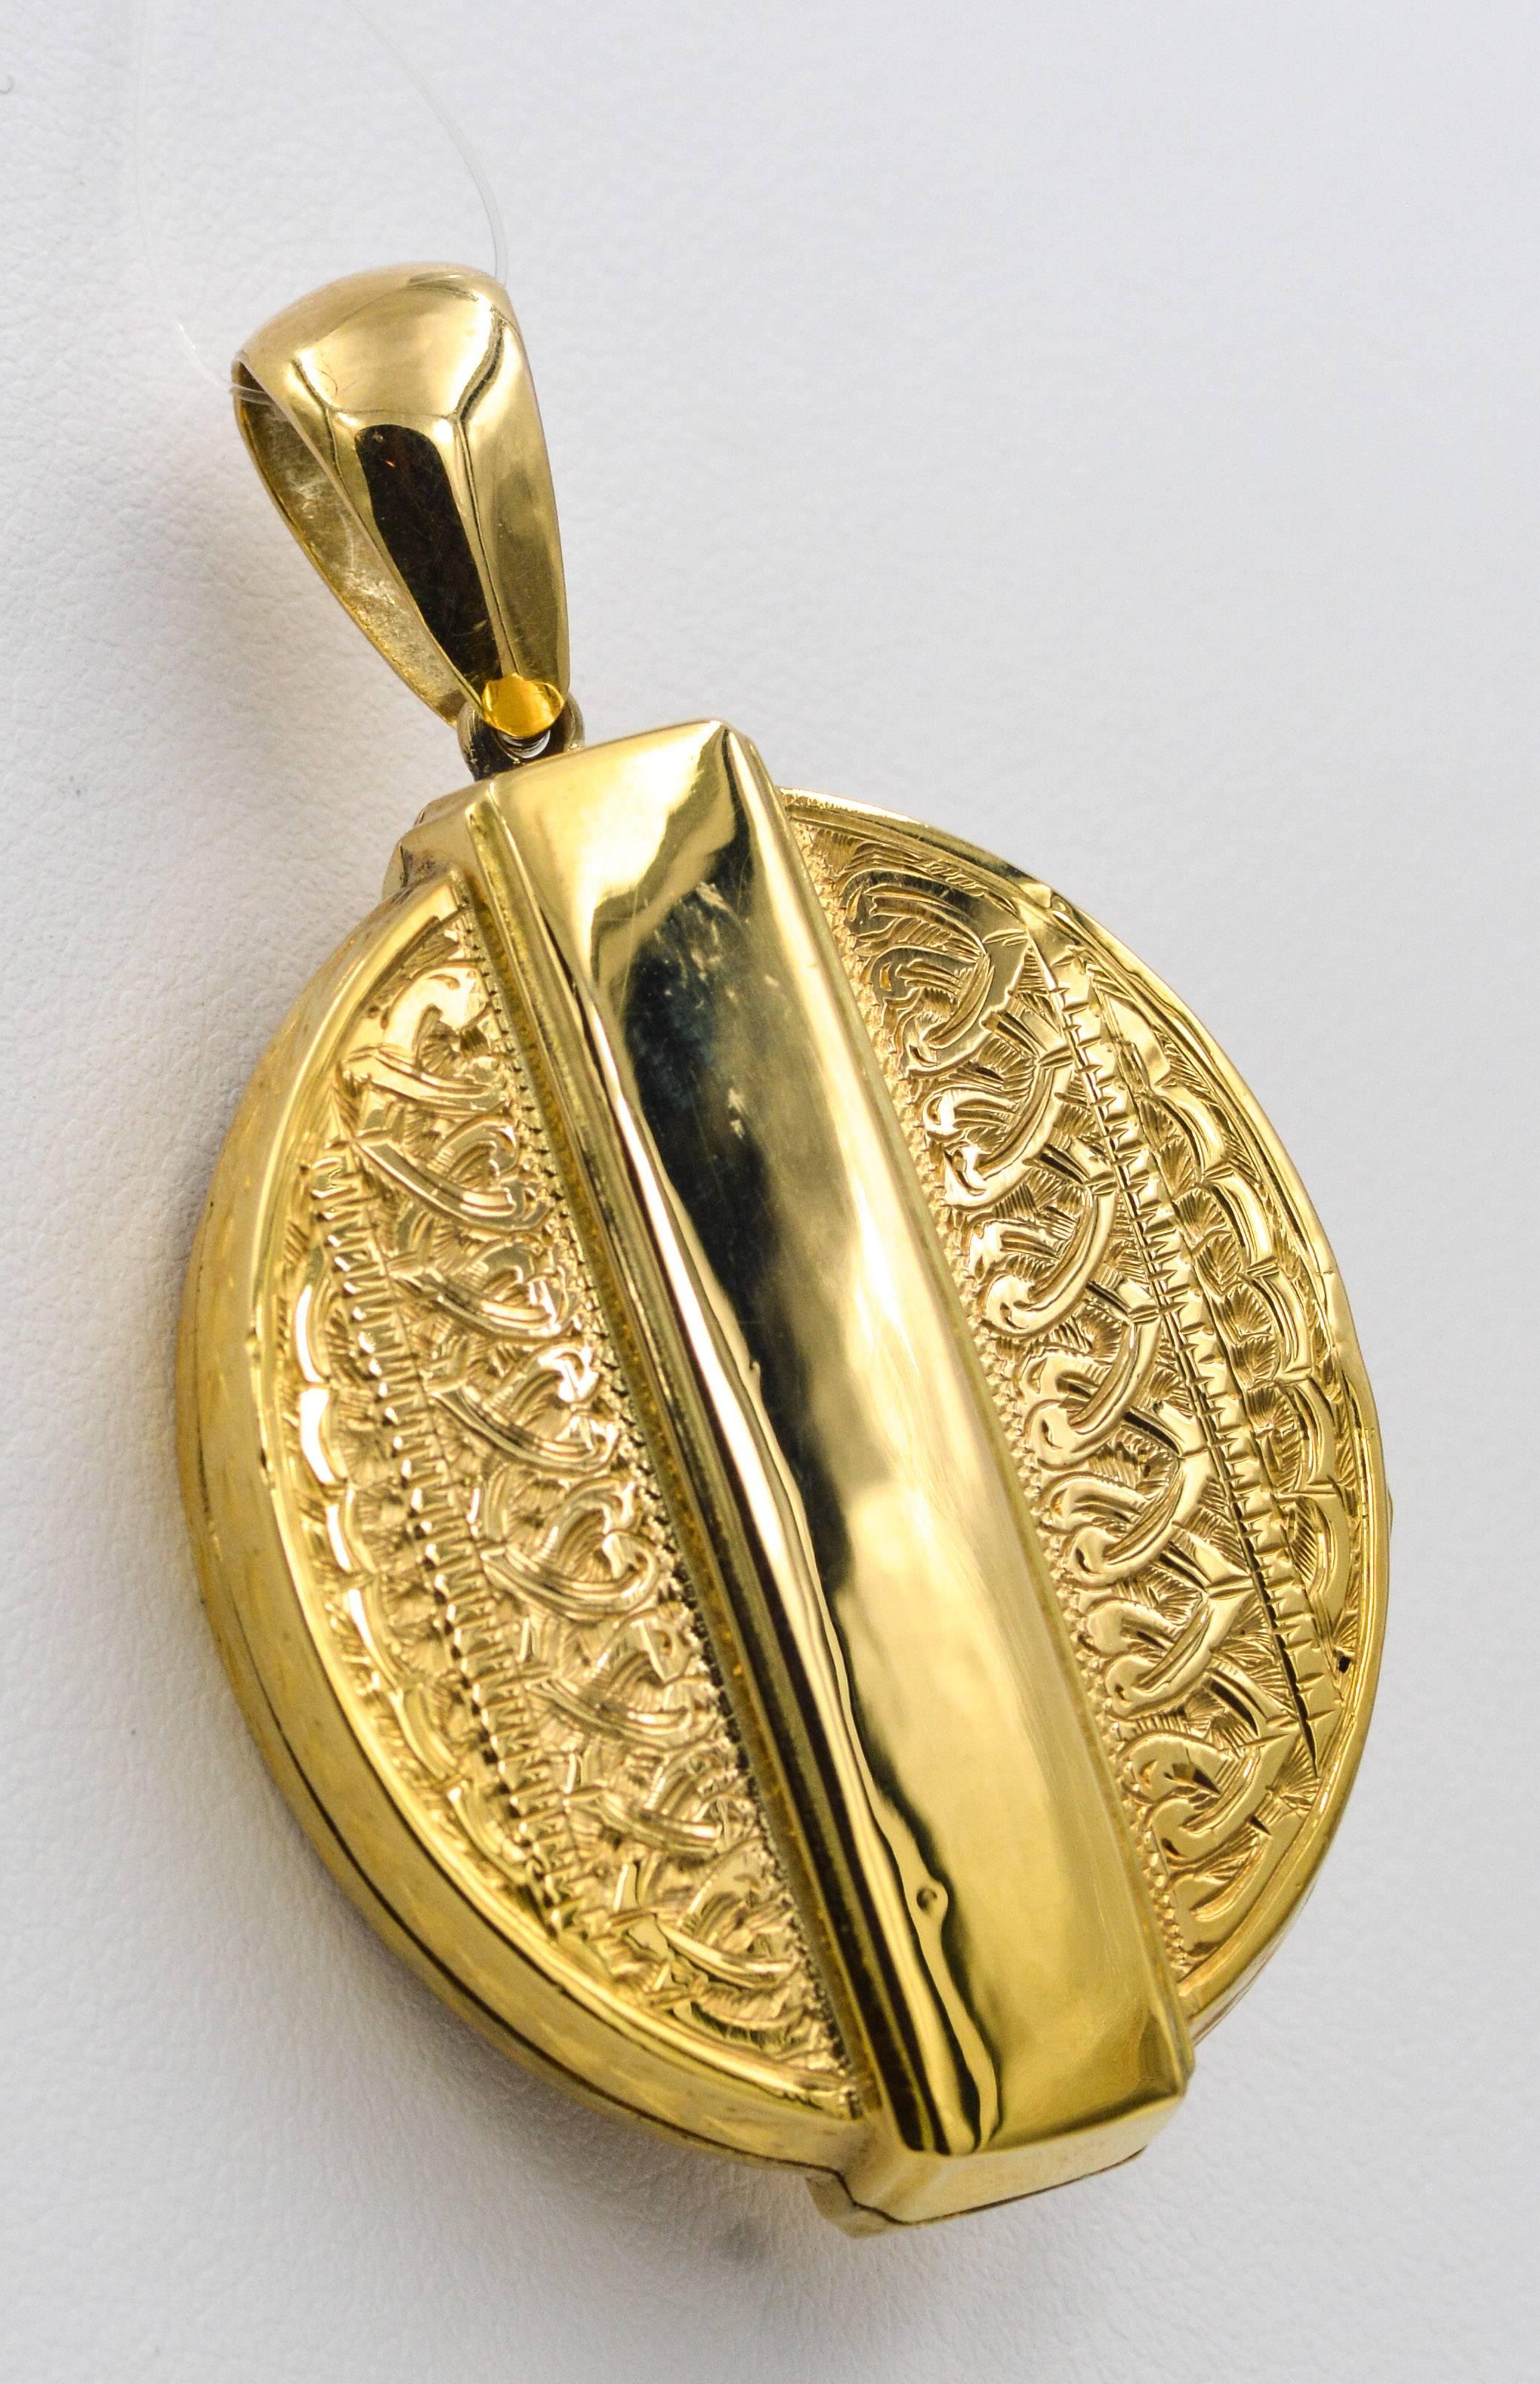 Wearing this piece of history will surely become a converstaion piece. This classic late 19th century locket is designed with a beautitul buckle and strap design with a hand engraved floral pattern covering the entire locket.  The locket has inside